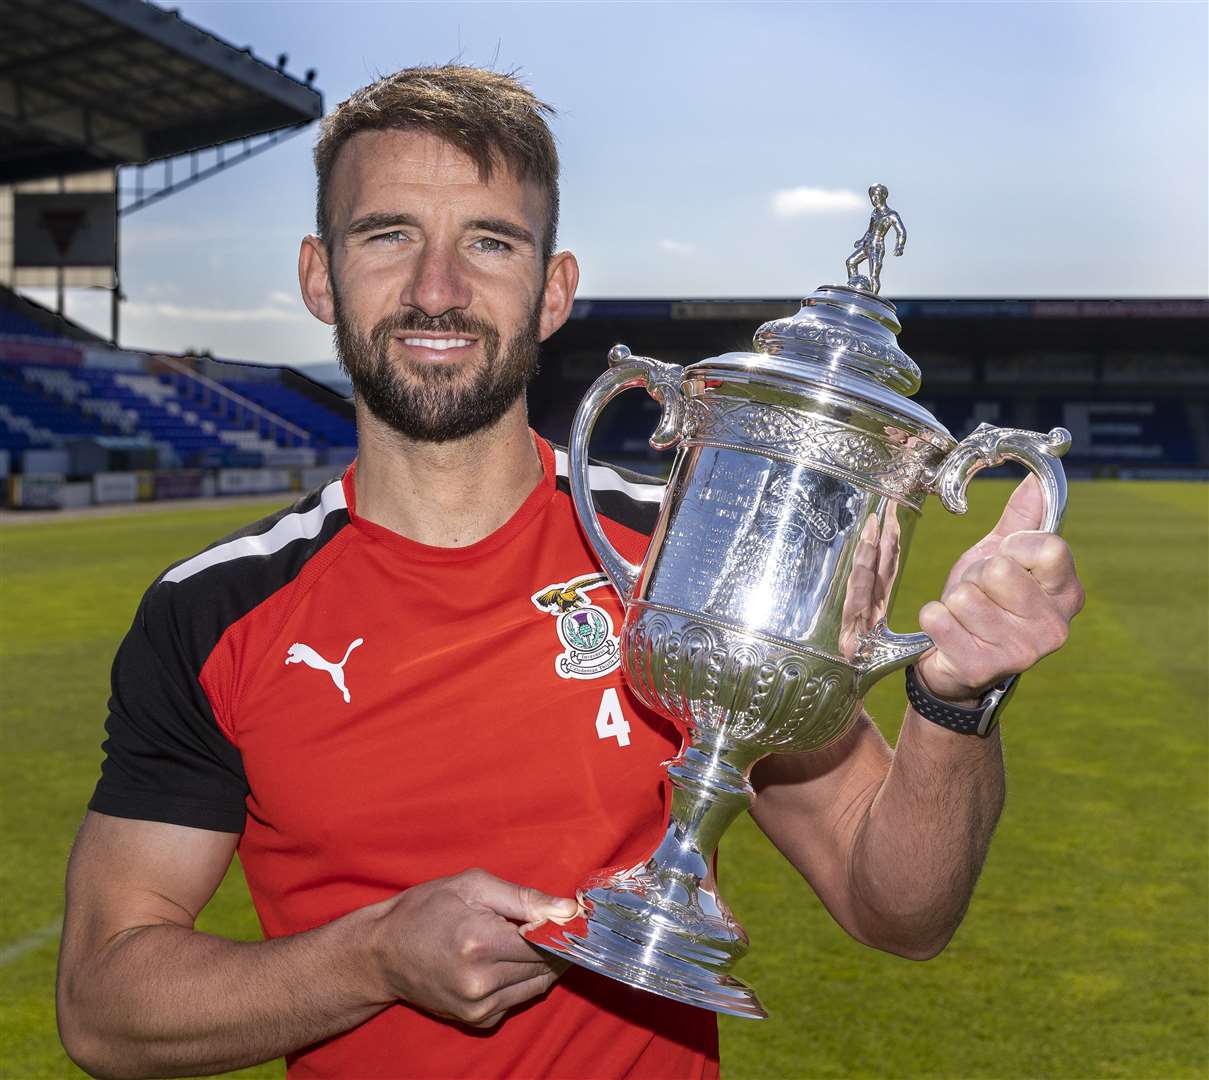 Inverness Caley Thistle captain Sean Welsh has waited his whole career for the chance to play in a Scottish Cup final at Hampden Park.